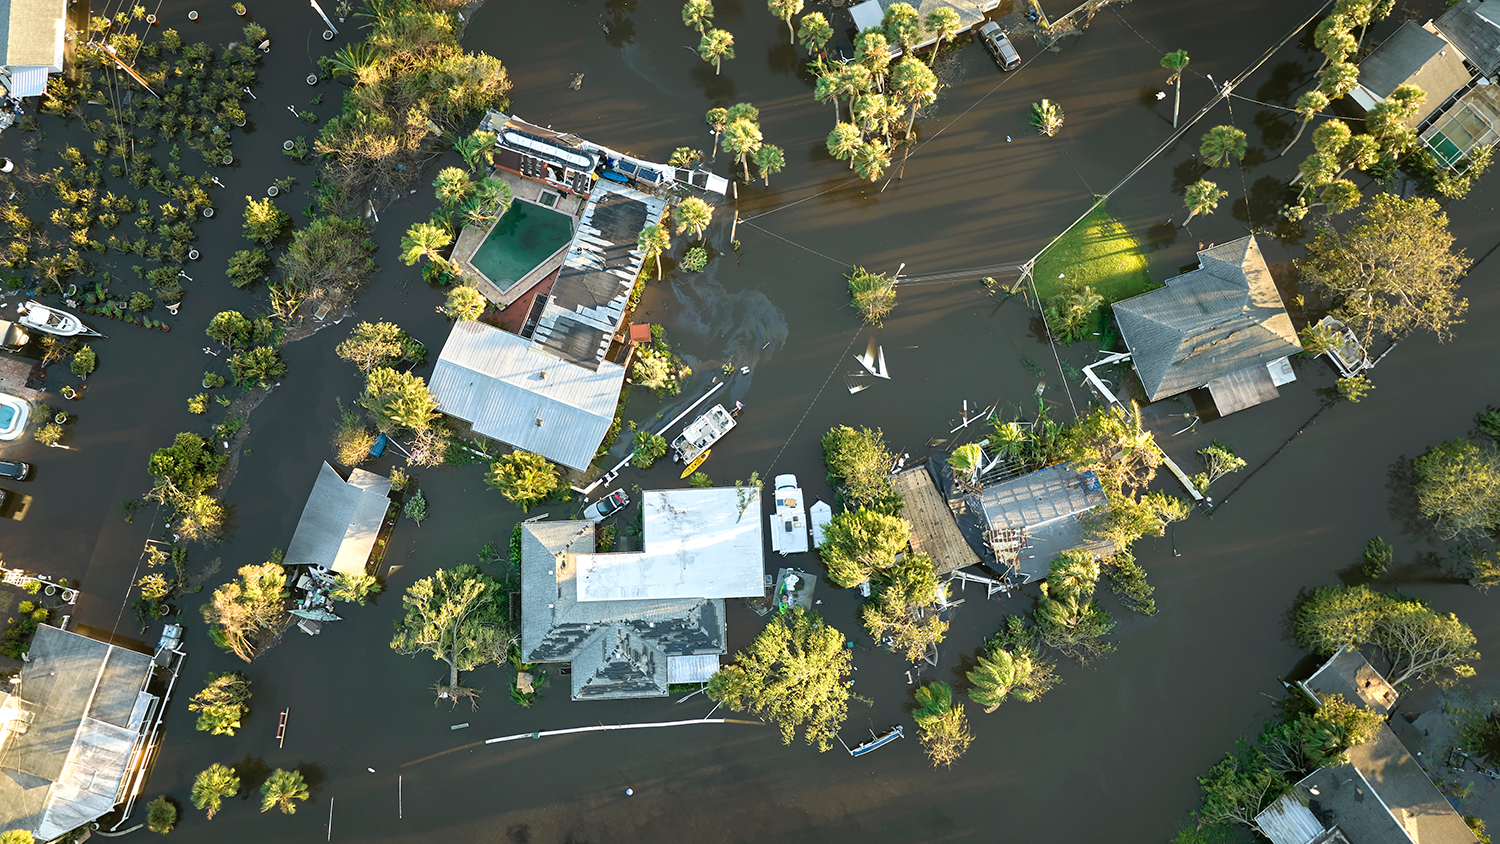 Hurricane Ian flooded thousands of houses in Florida